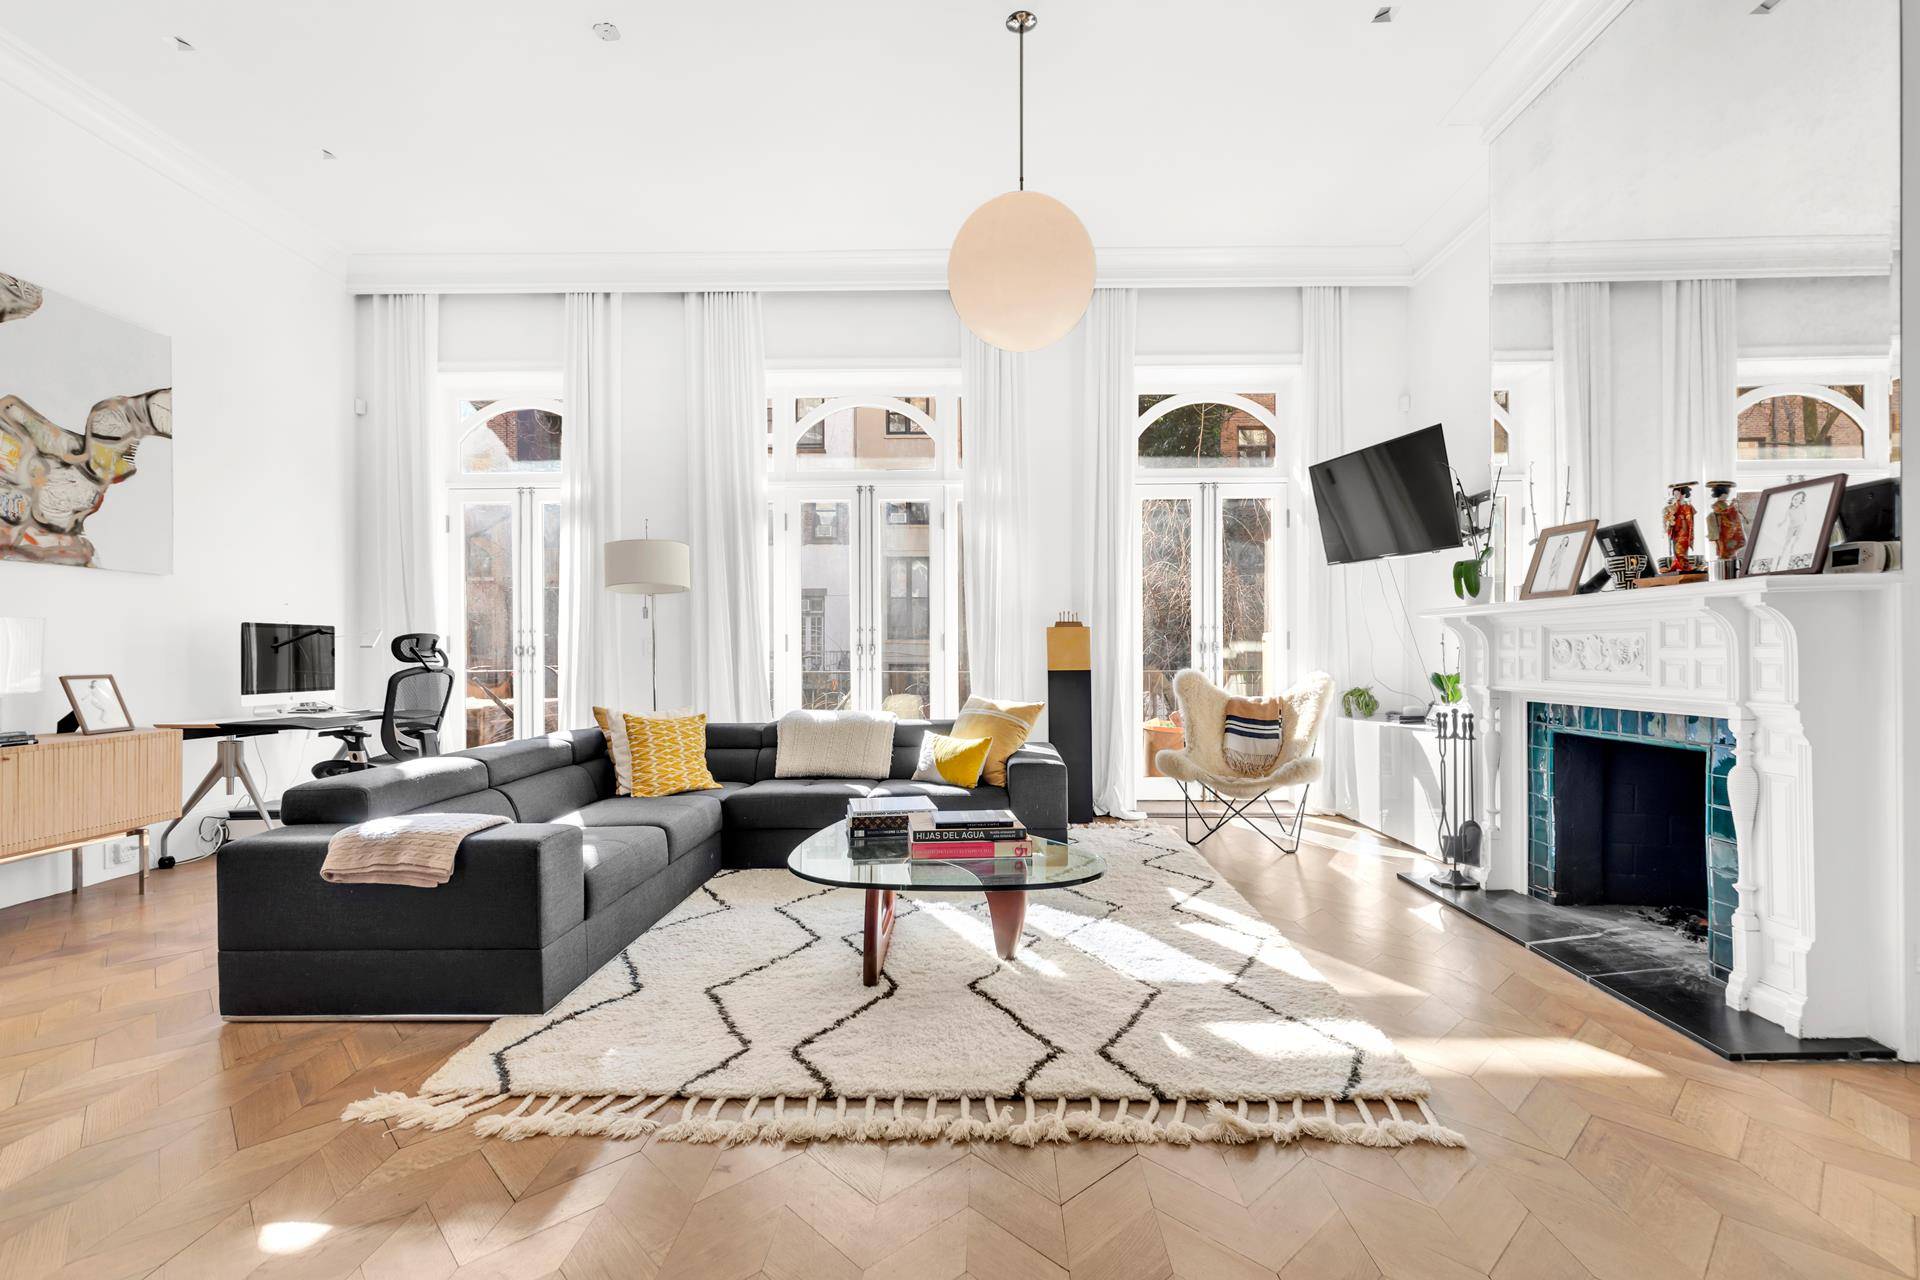 Luxury awaits at this stunning parlor floor duplex apartment located in the historic Fitzroy Townhouses in the heart of Chelsea.